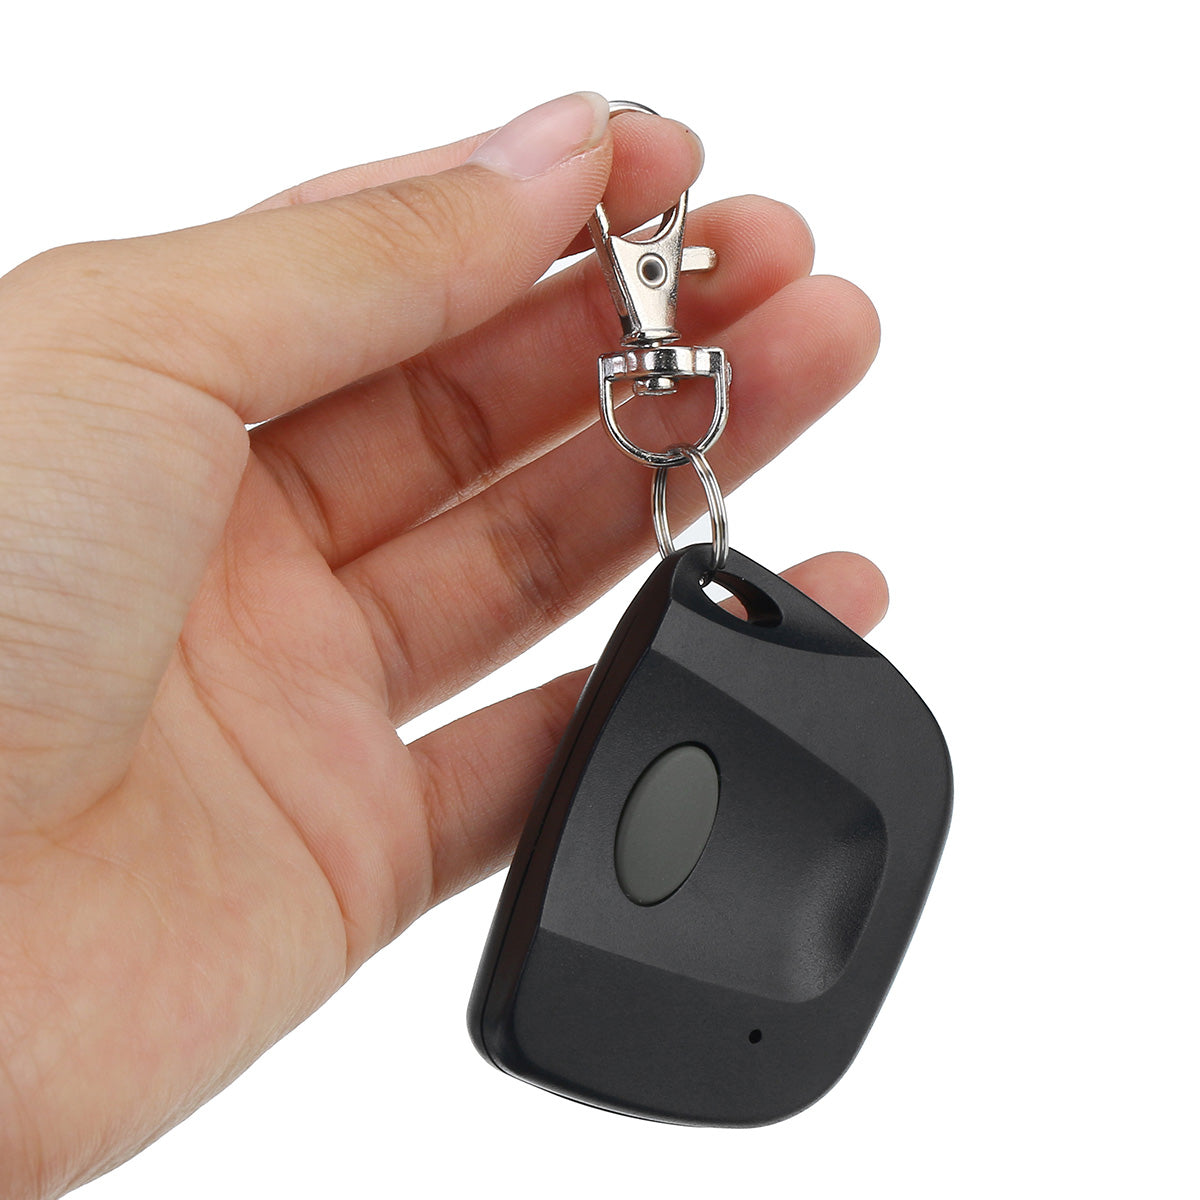 Key Chain Remote 1 Button Garage Door Opener - Compatible with Multicode 3089, 10 Dip Switch, 300Mhz